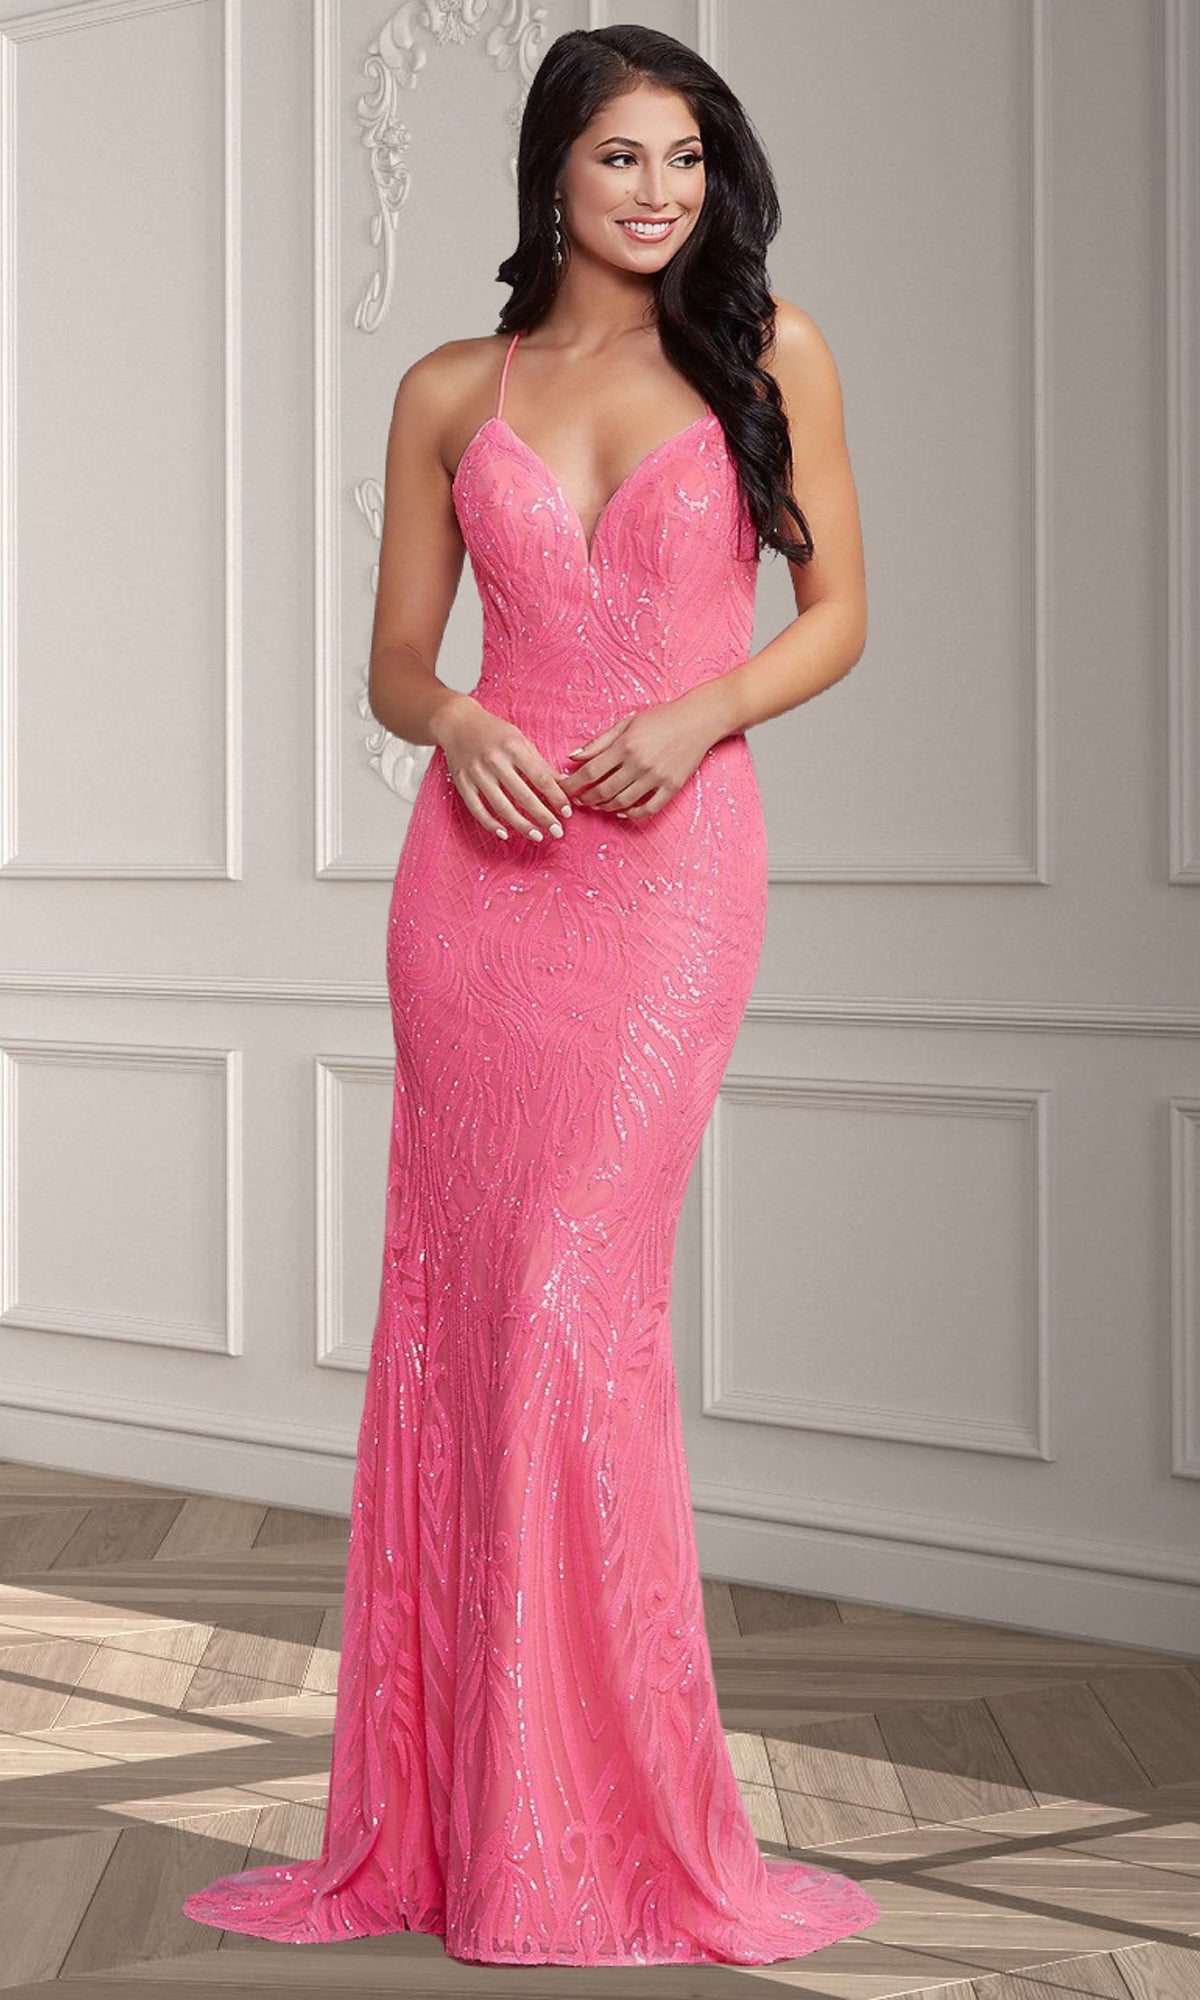 Sexy Strappy-Back Long Shimmer Formal Prom Dress Hot Pink Shimmer / 0